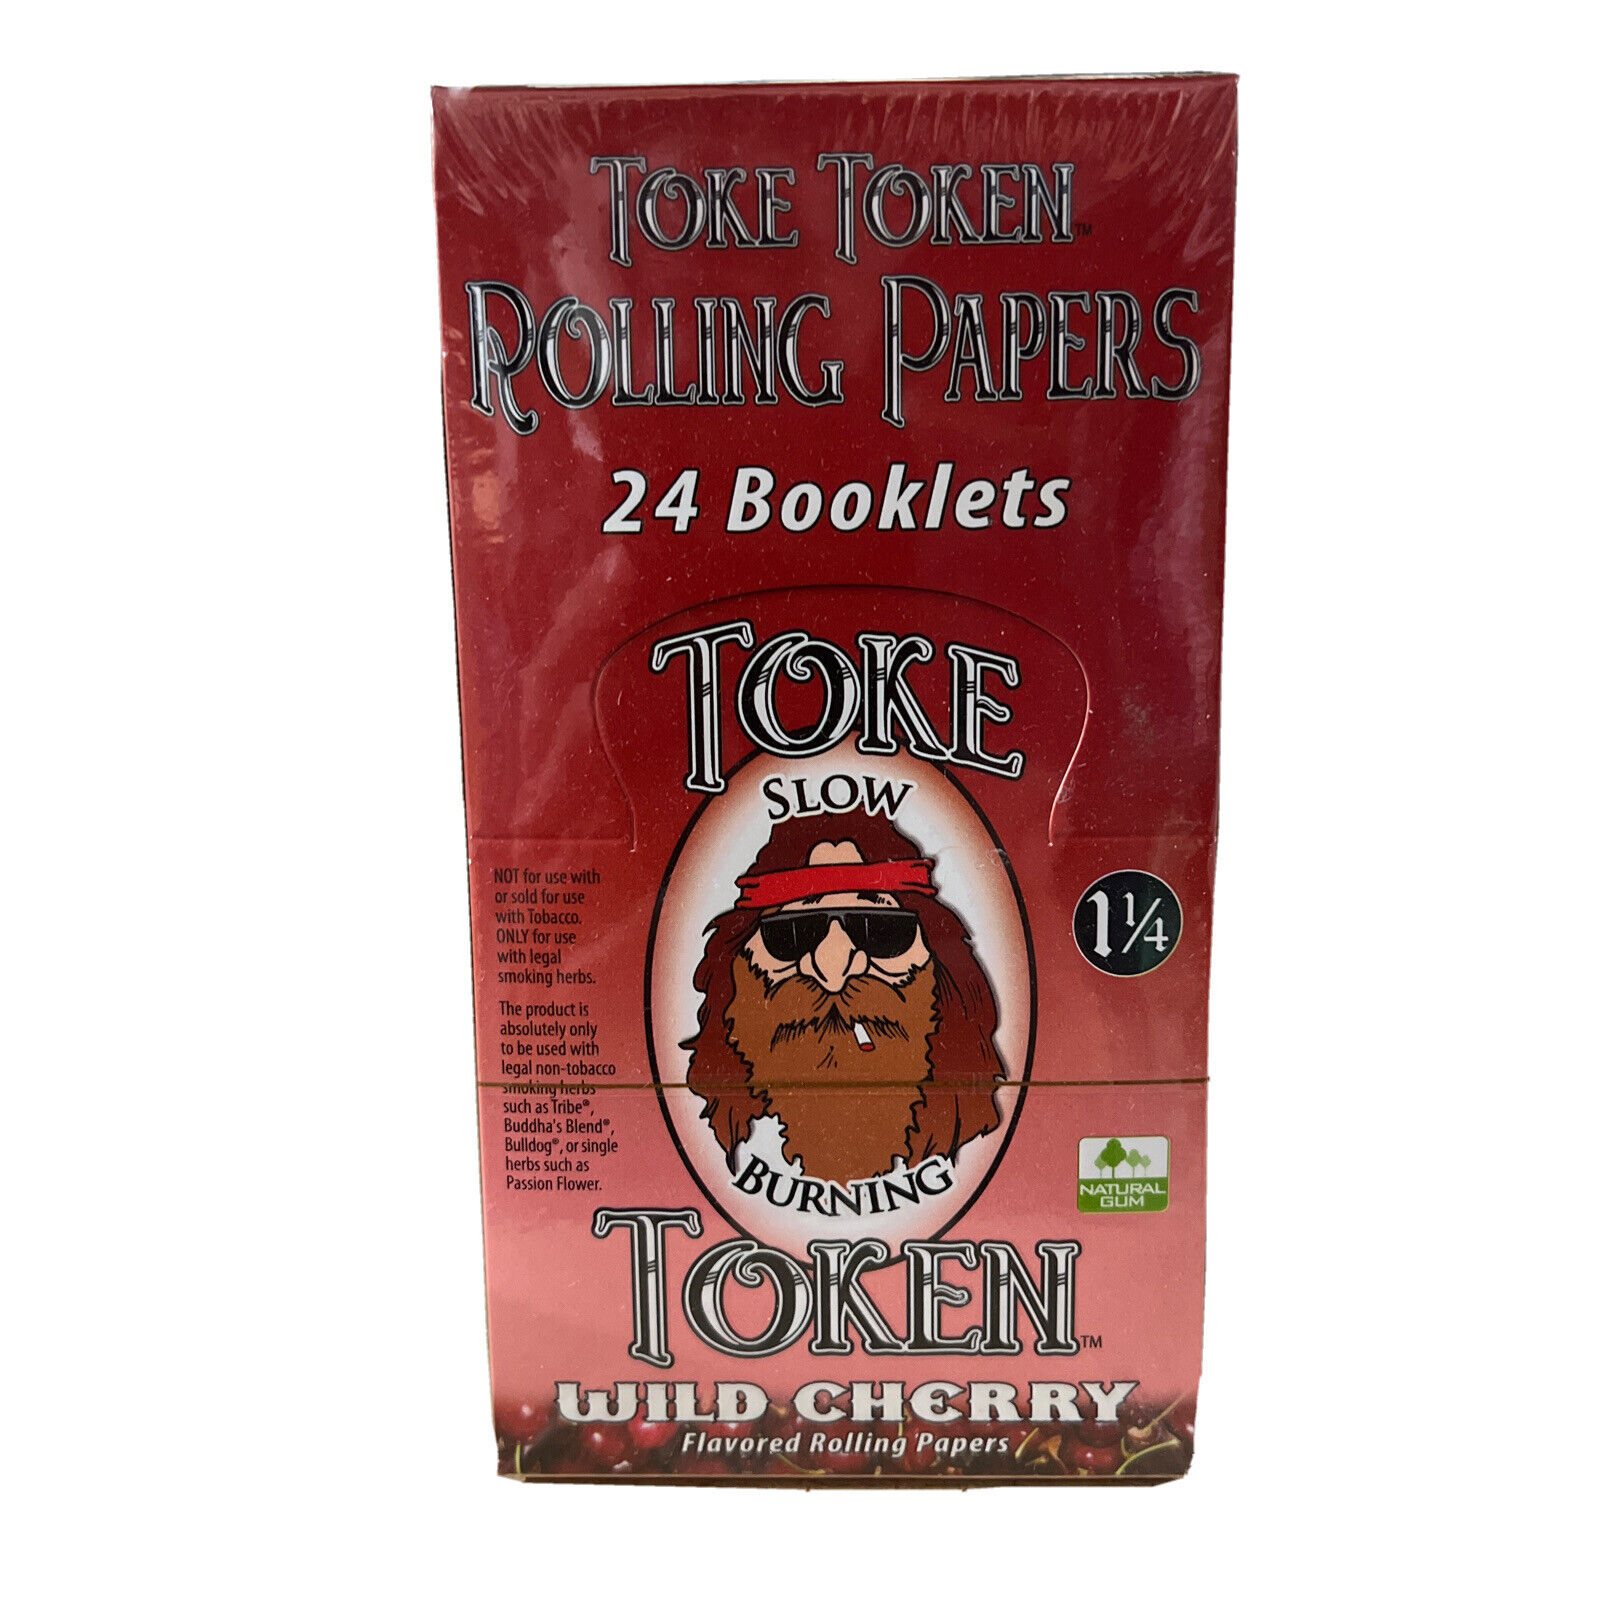 24 pack 1 1/4 Toke Token Flavored Cigarette Rolling Papers Wild Cherry